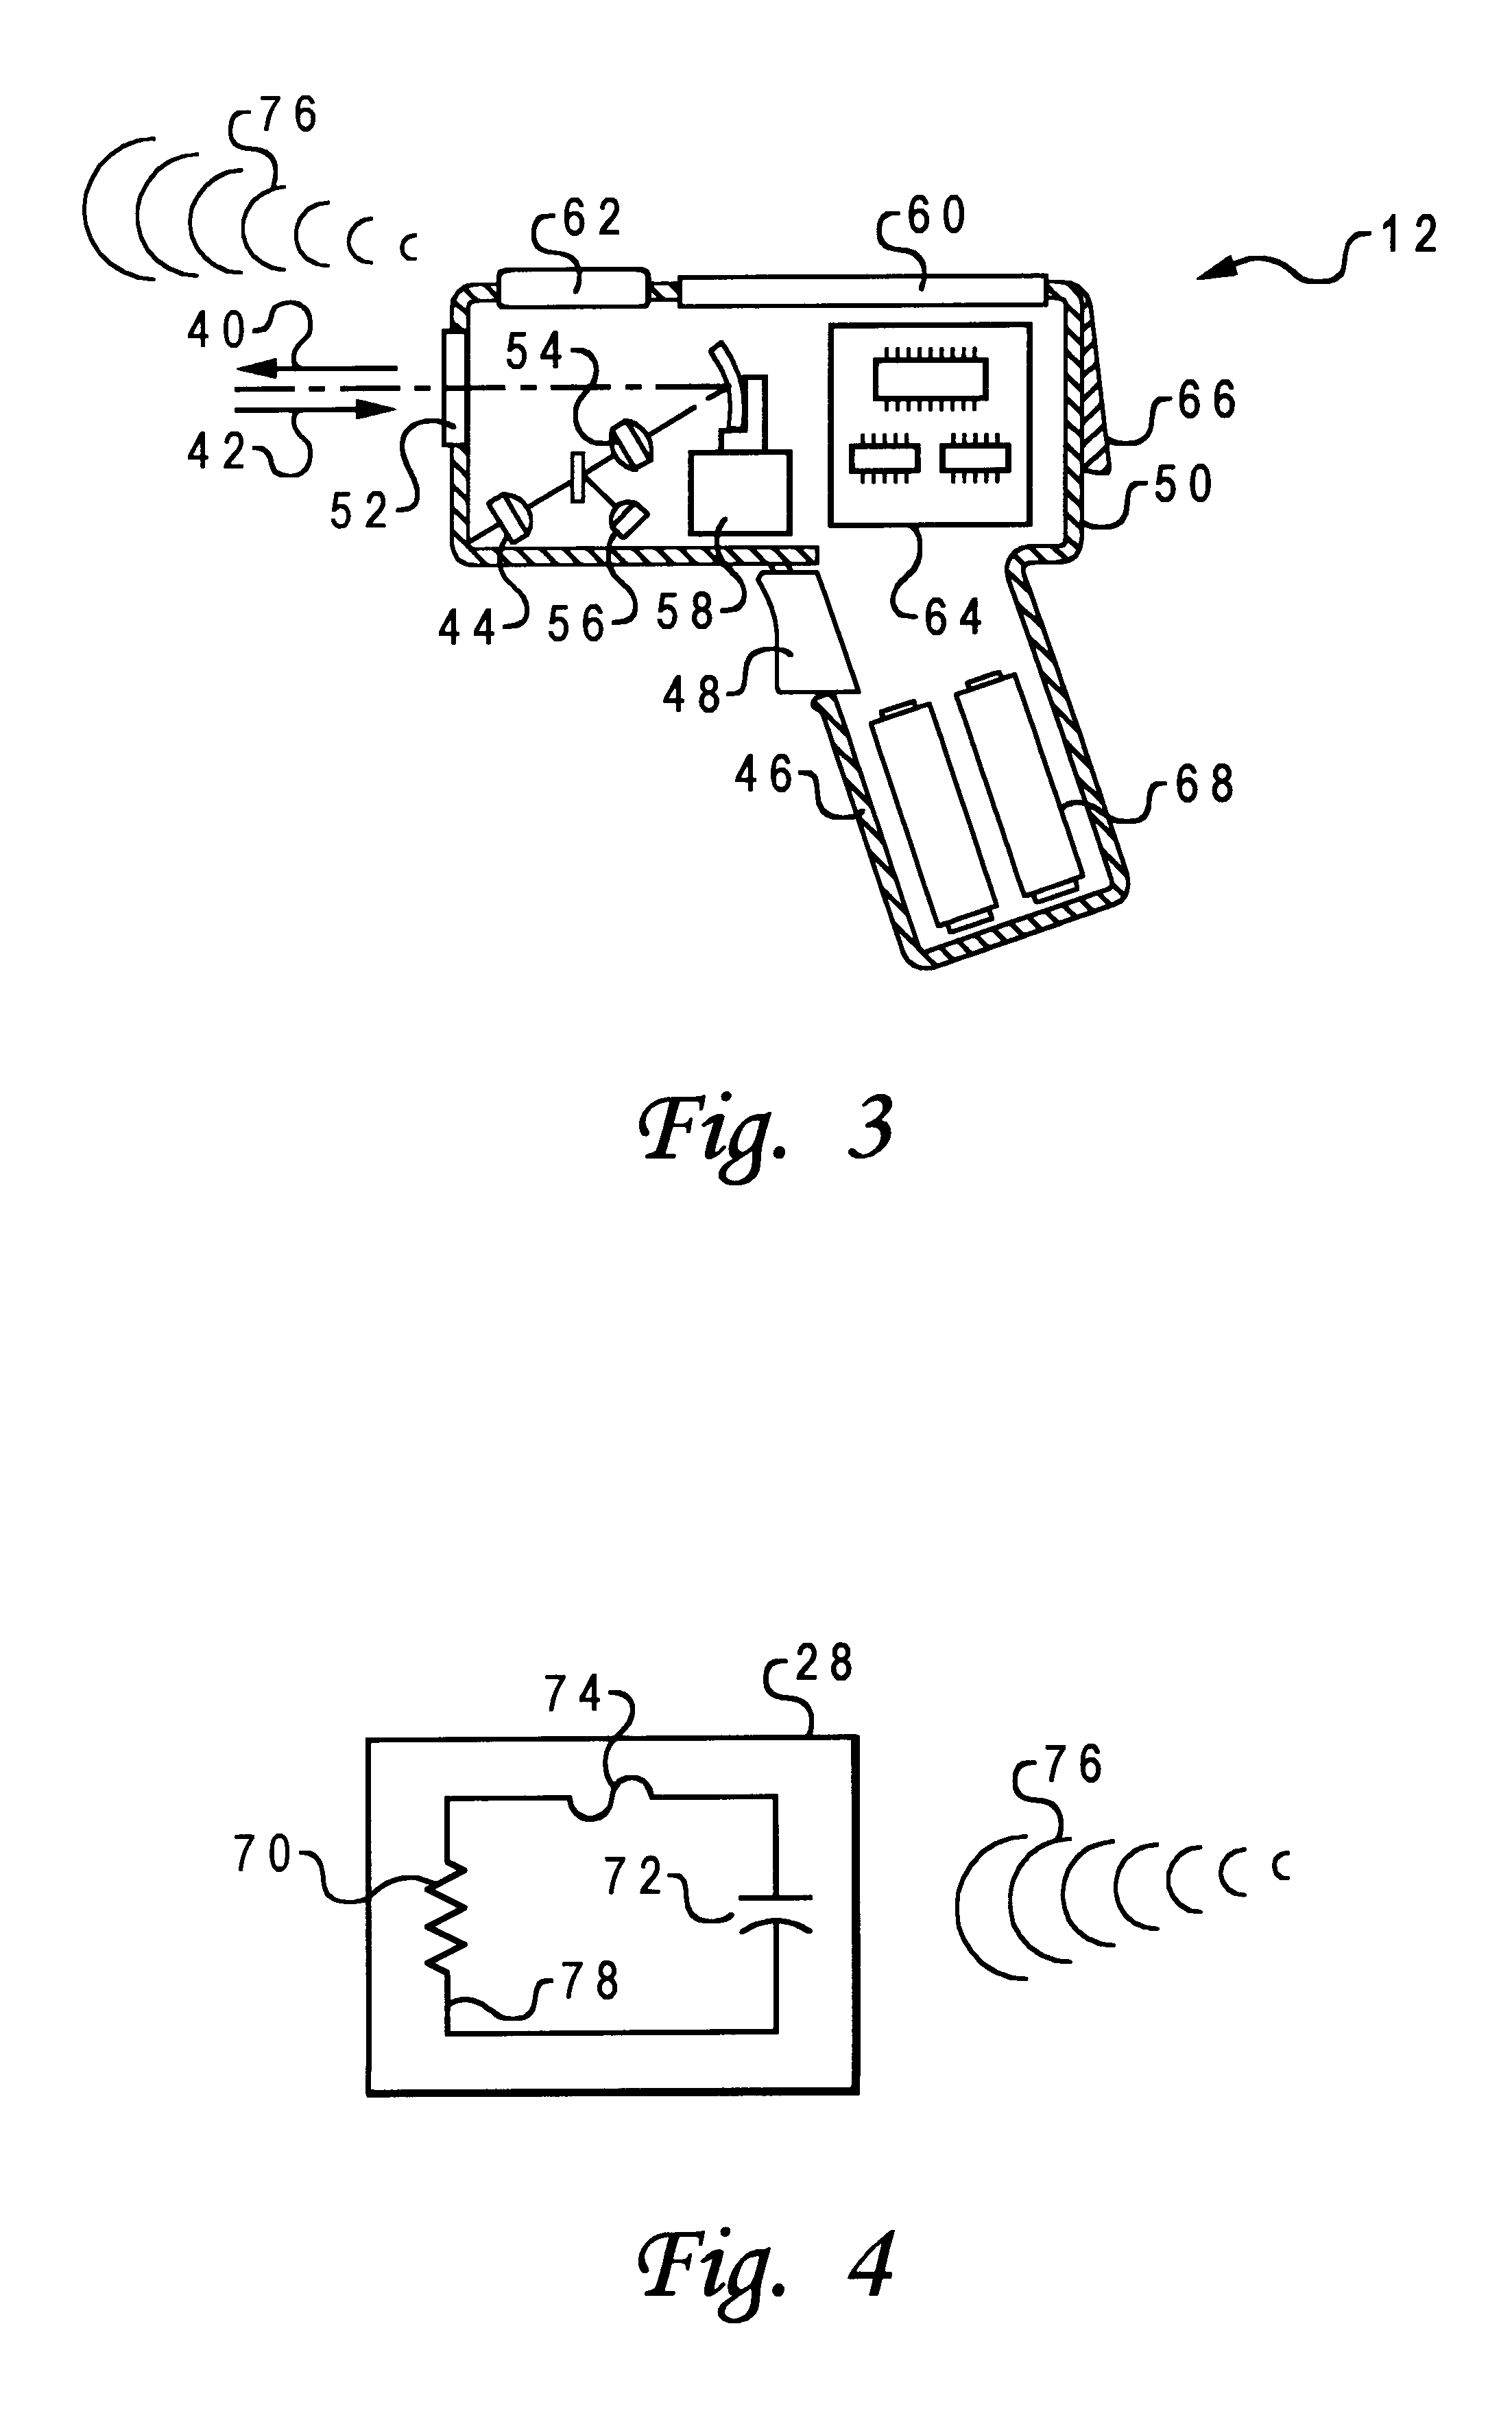 Method and system for a merchandise checkout system